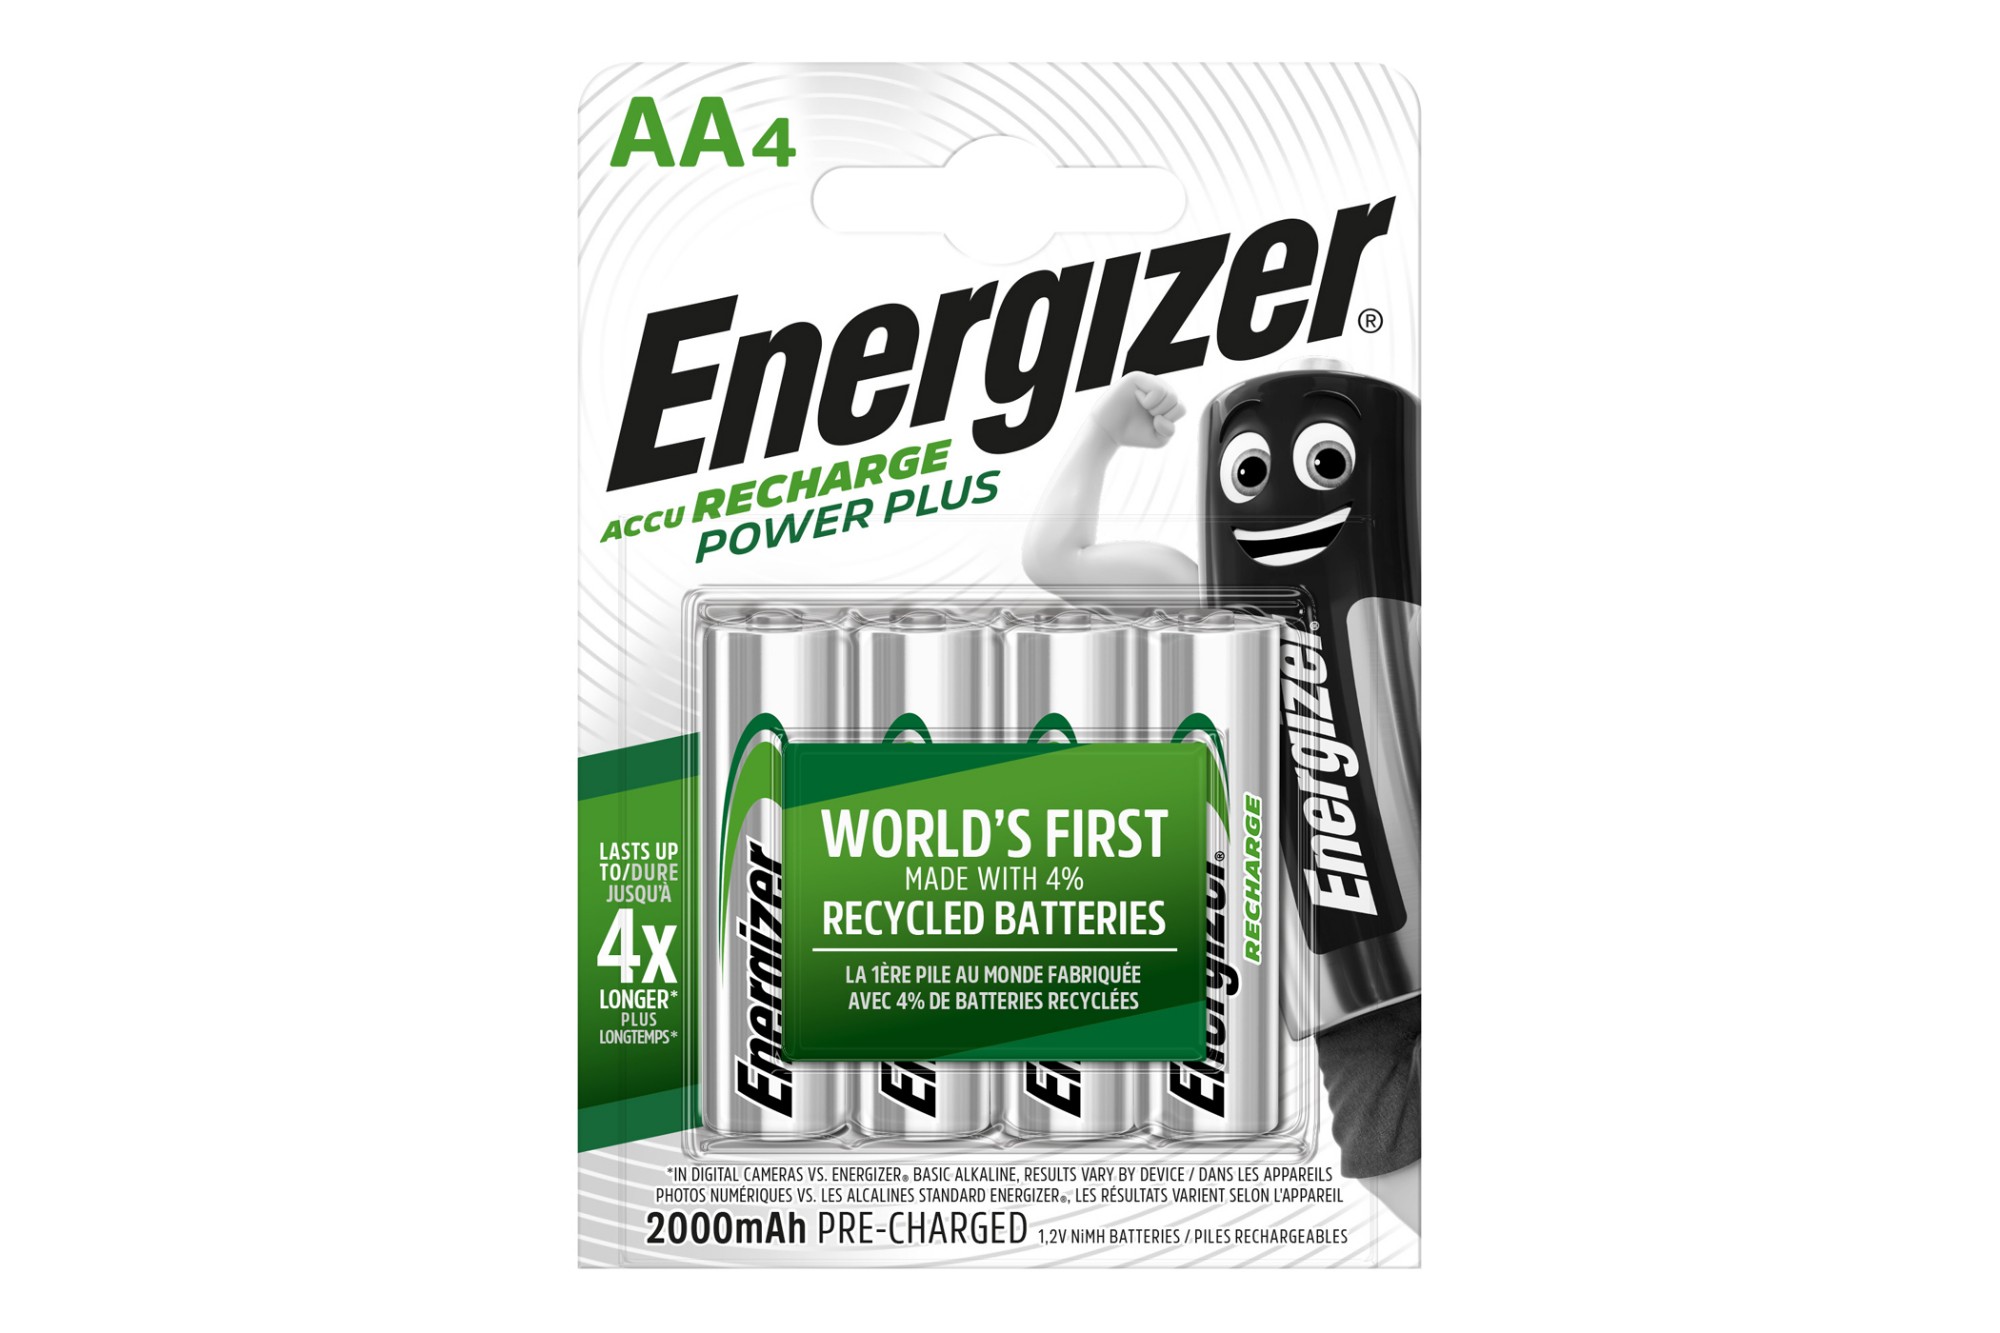 E300850400 ENERGIZER Power PLUS Rechargeable 2000mAh Ni-MH AA Batteries - Pack of 4